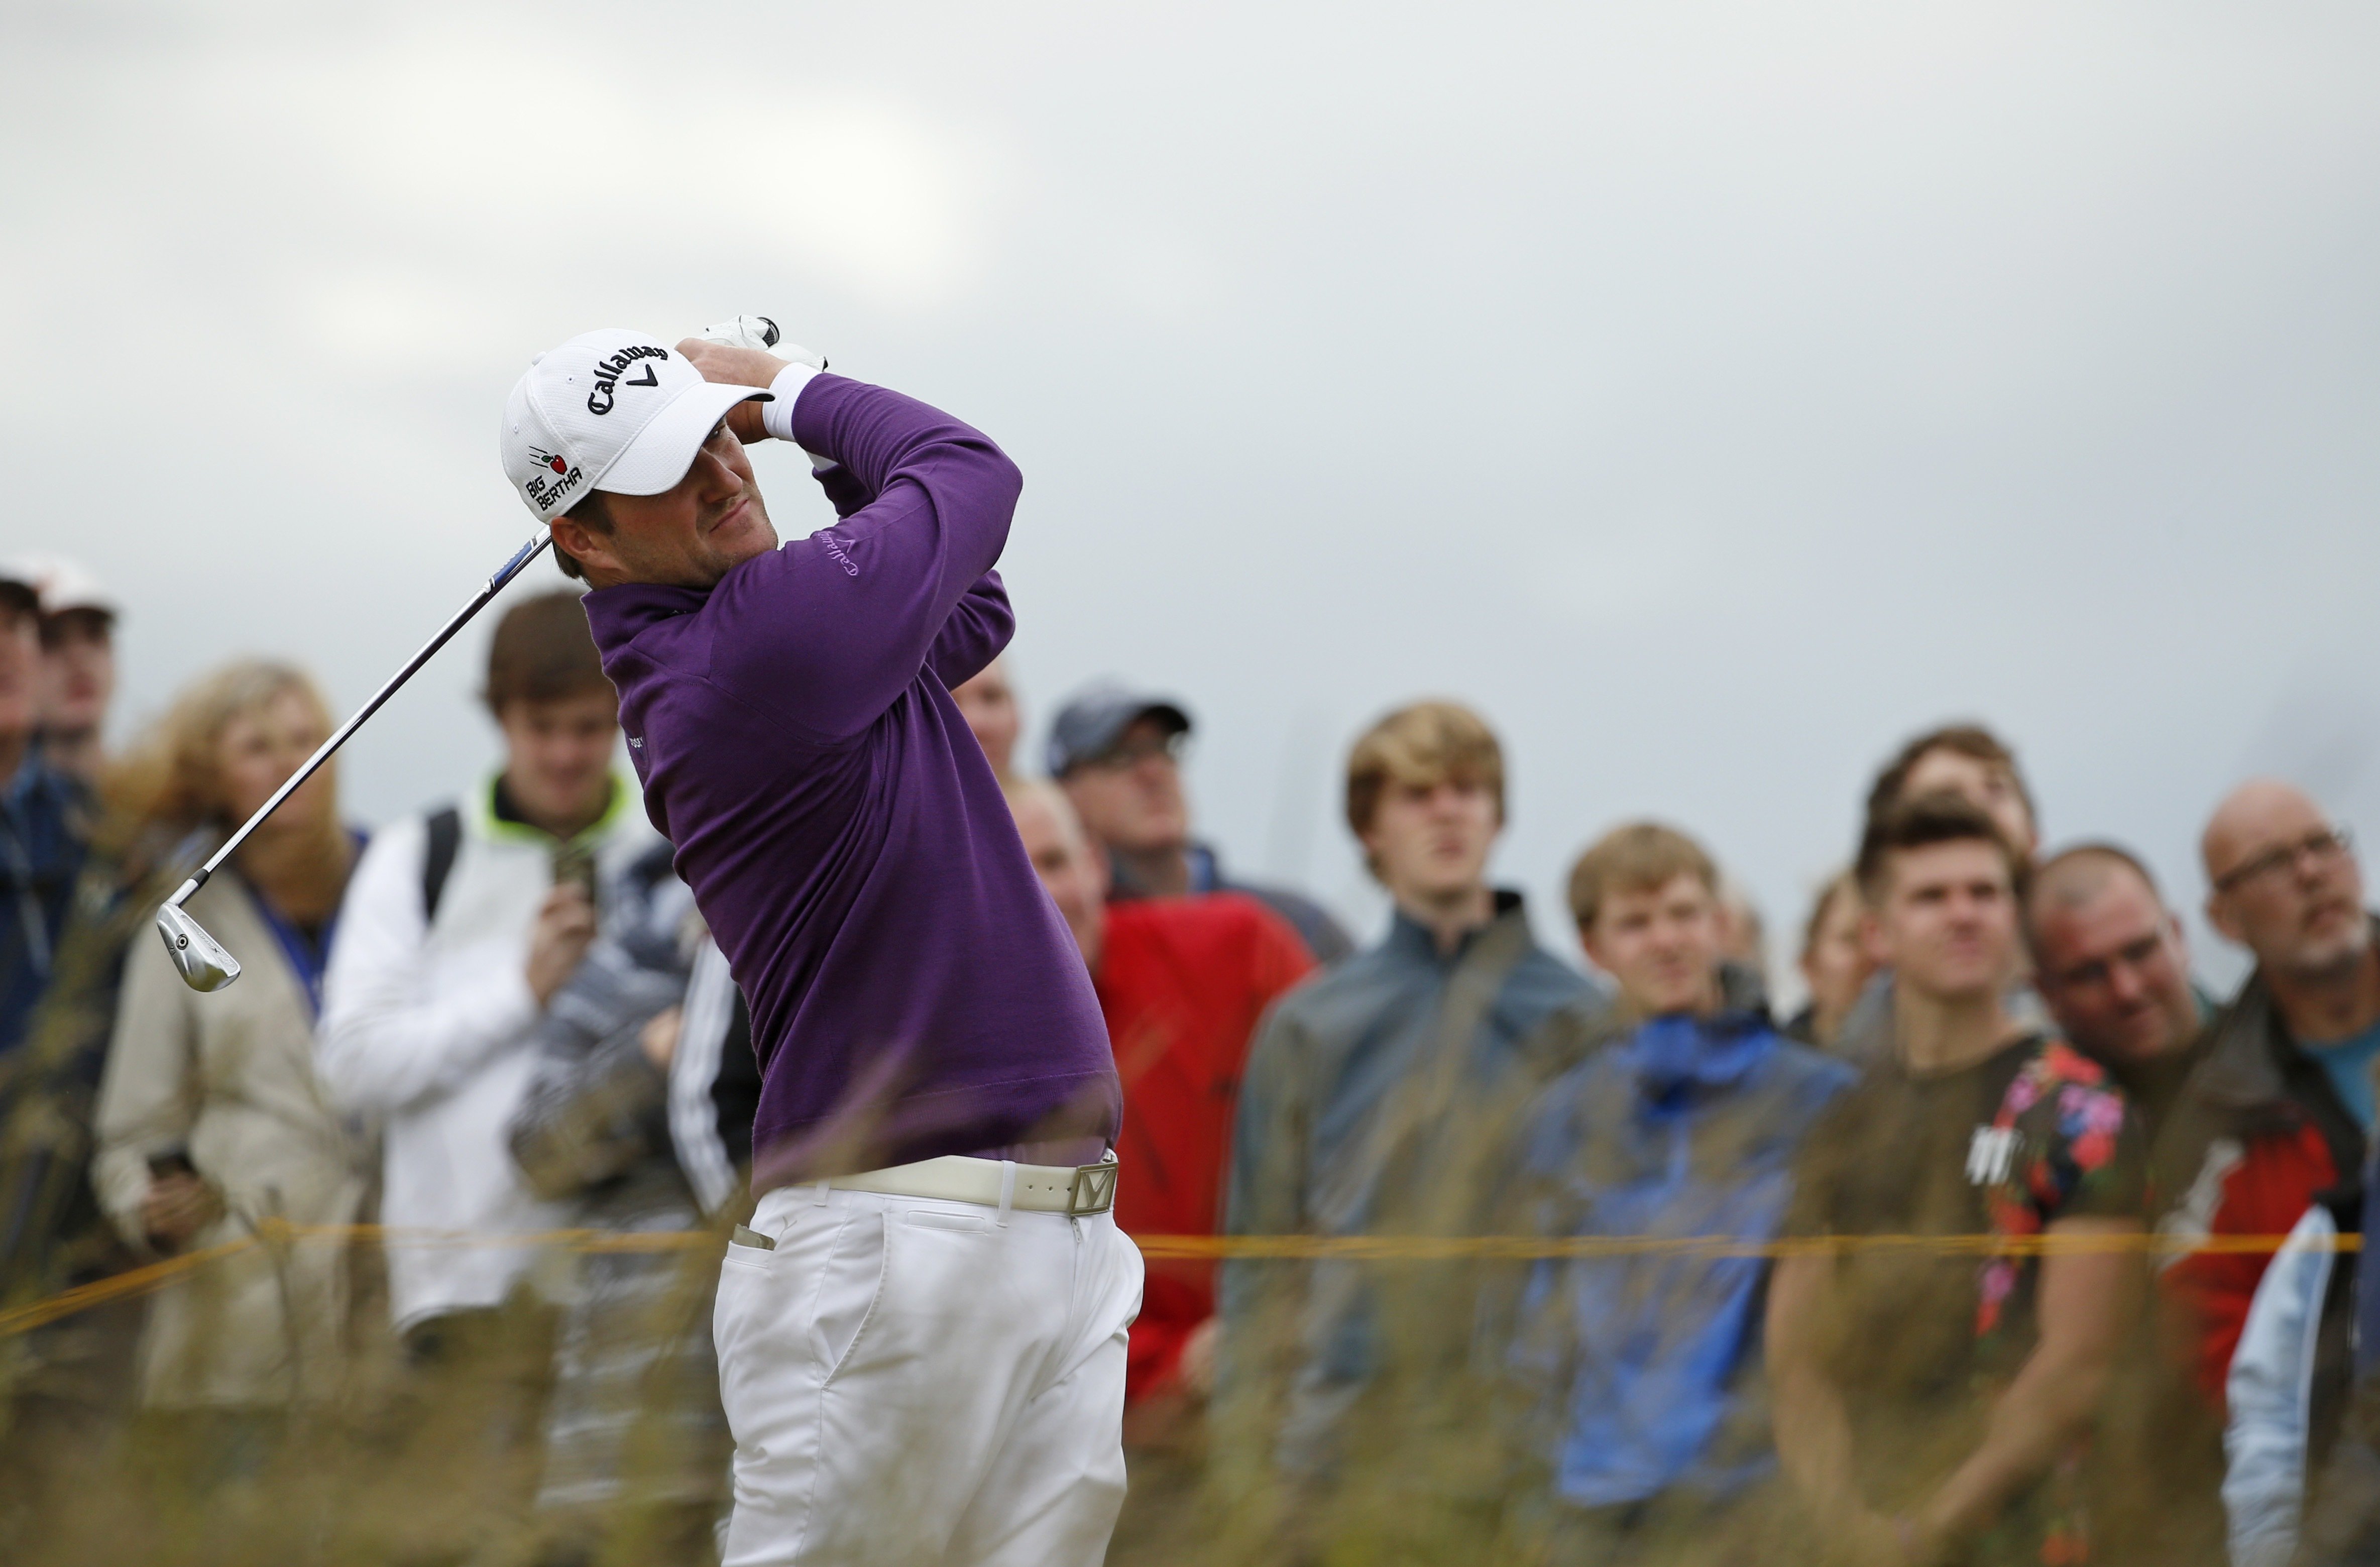 Scotland's Marc Warren has climbed up the leaderboard after following up his 68 yesterday, with 69 today. Photo: AP